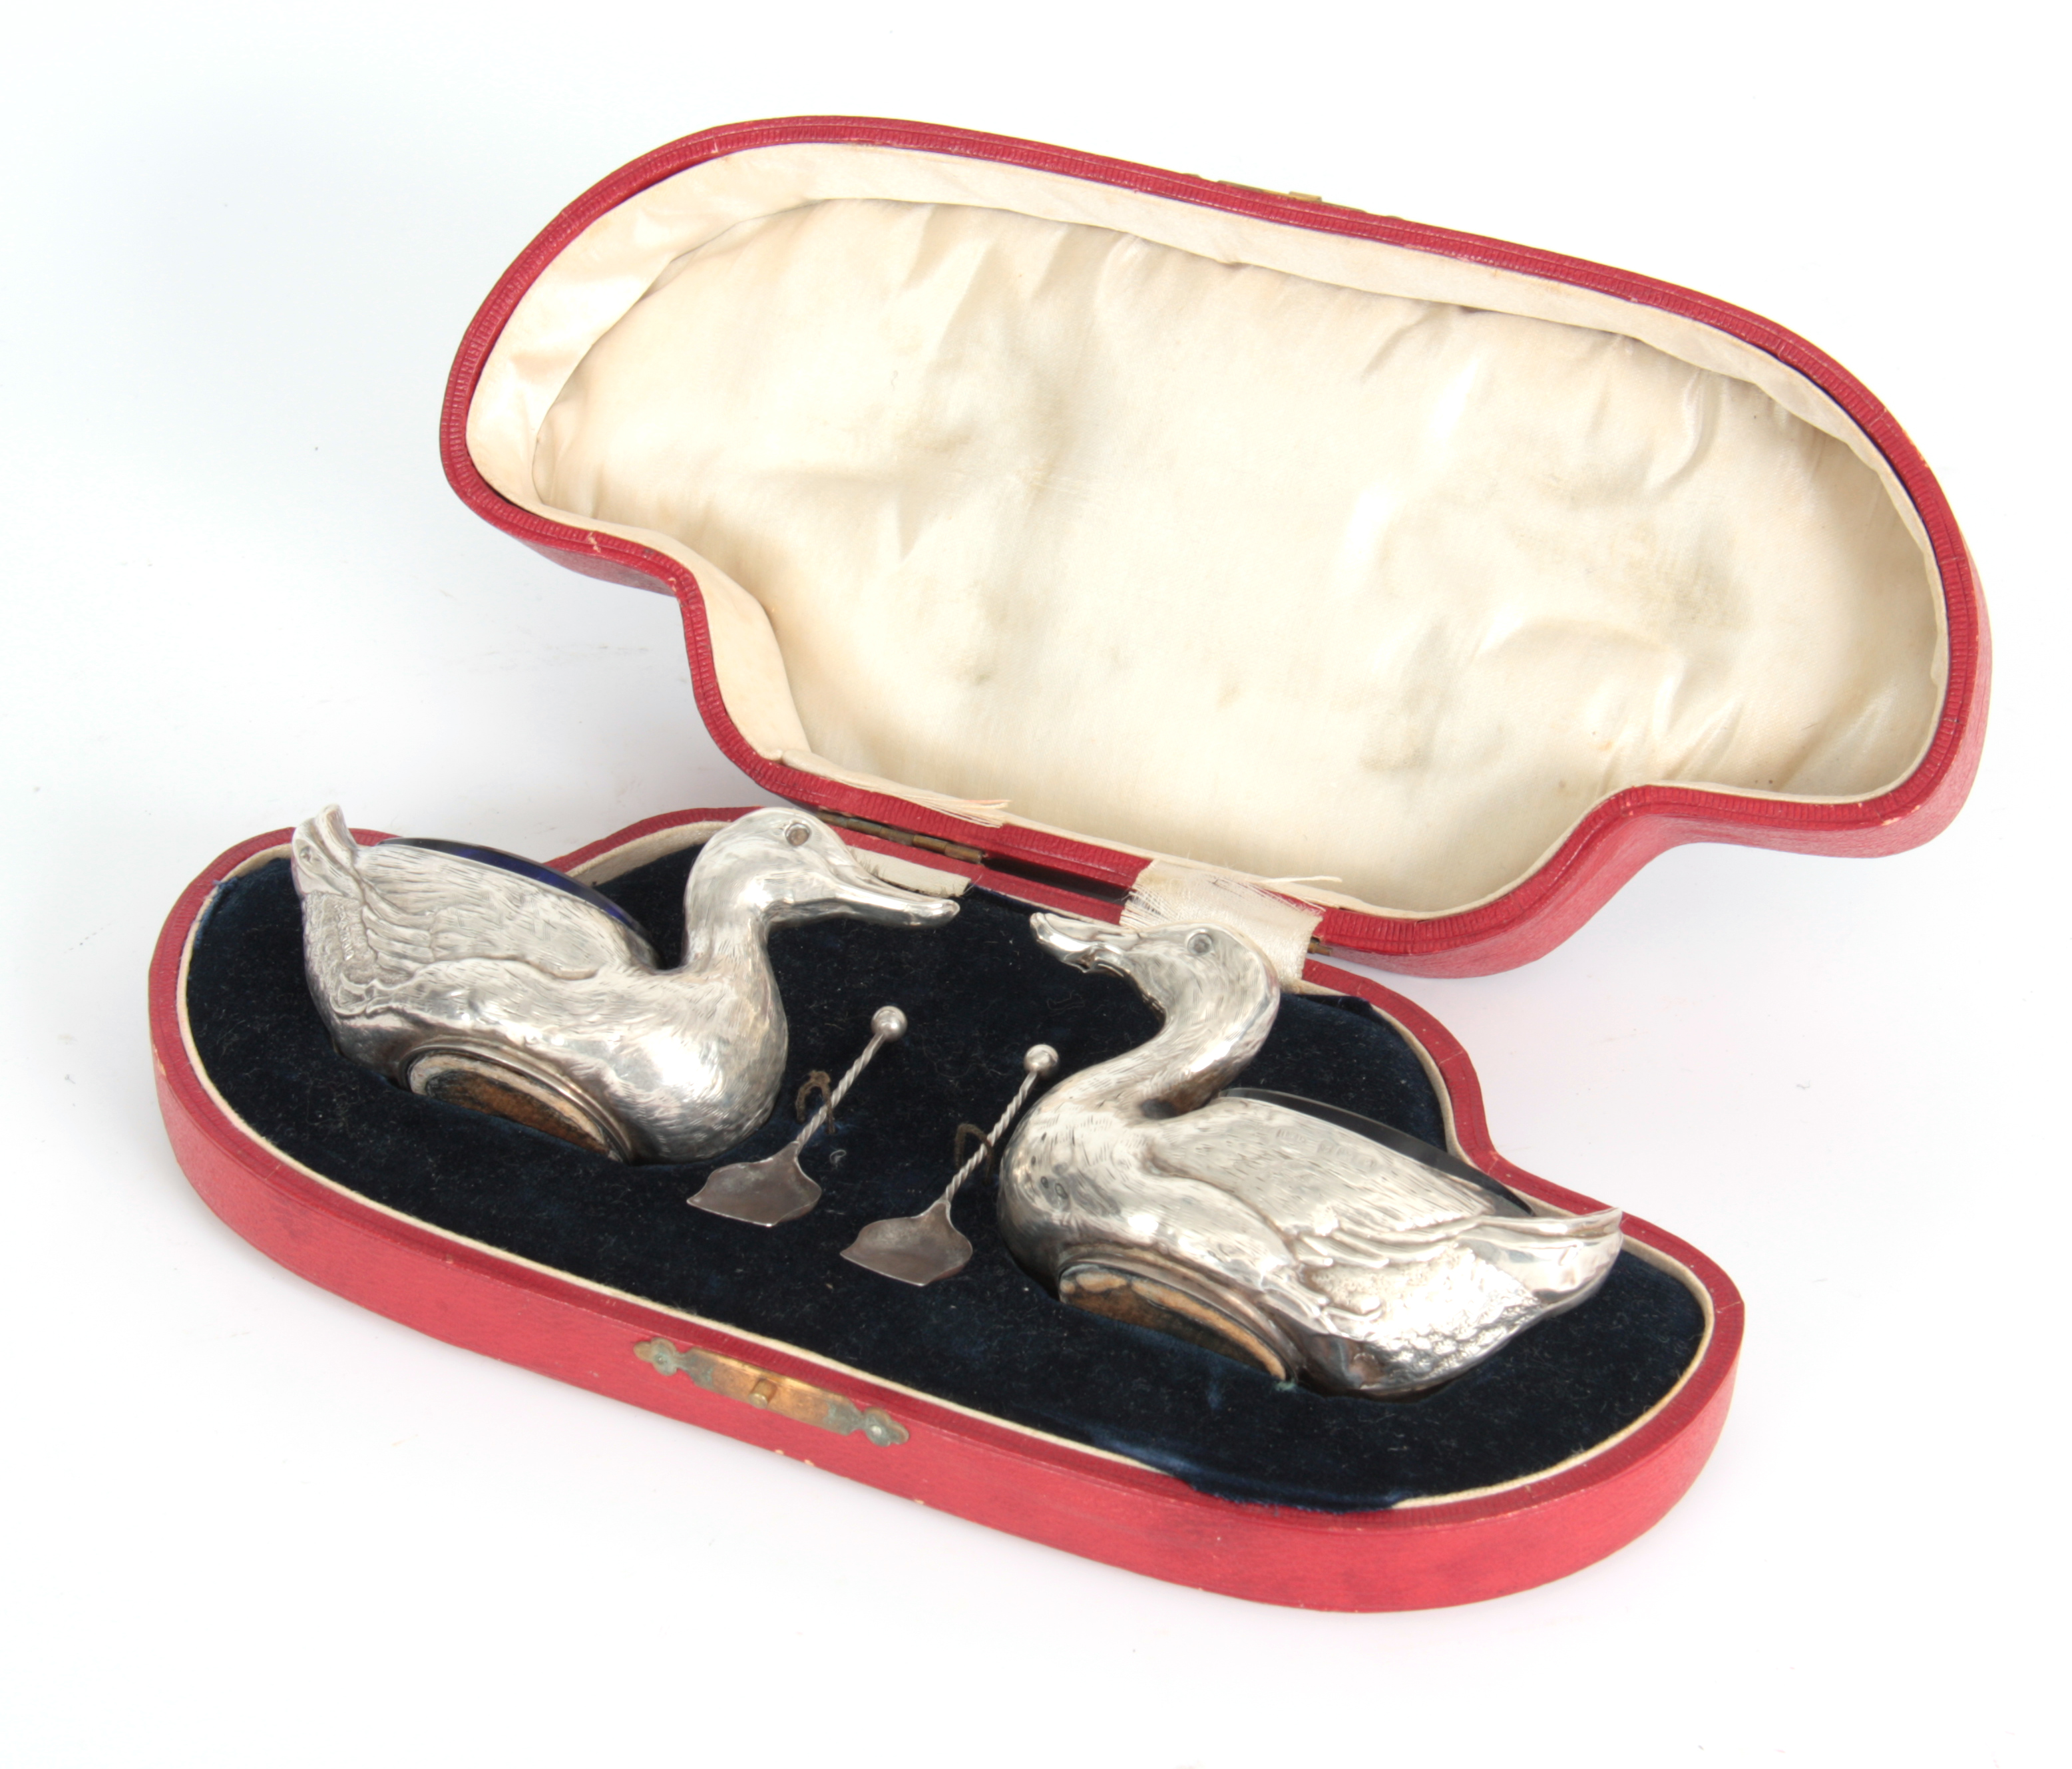 A CASED PAIR OF FIGURAL SILVER SALTS MODELLED AS DUCKS WITH SHOVEL SHAPED SALT SPOONS hallmarked for